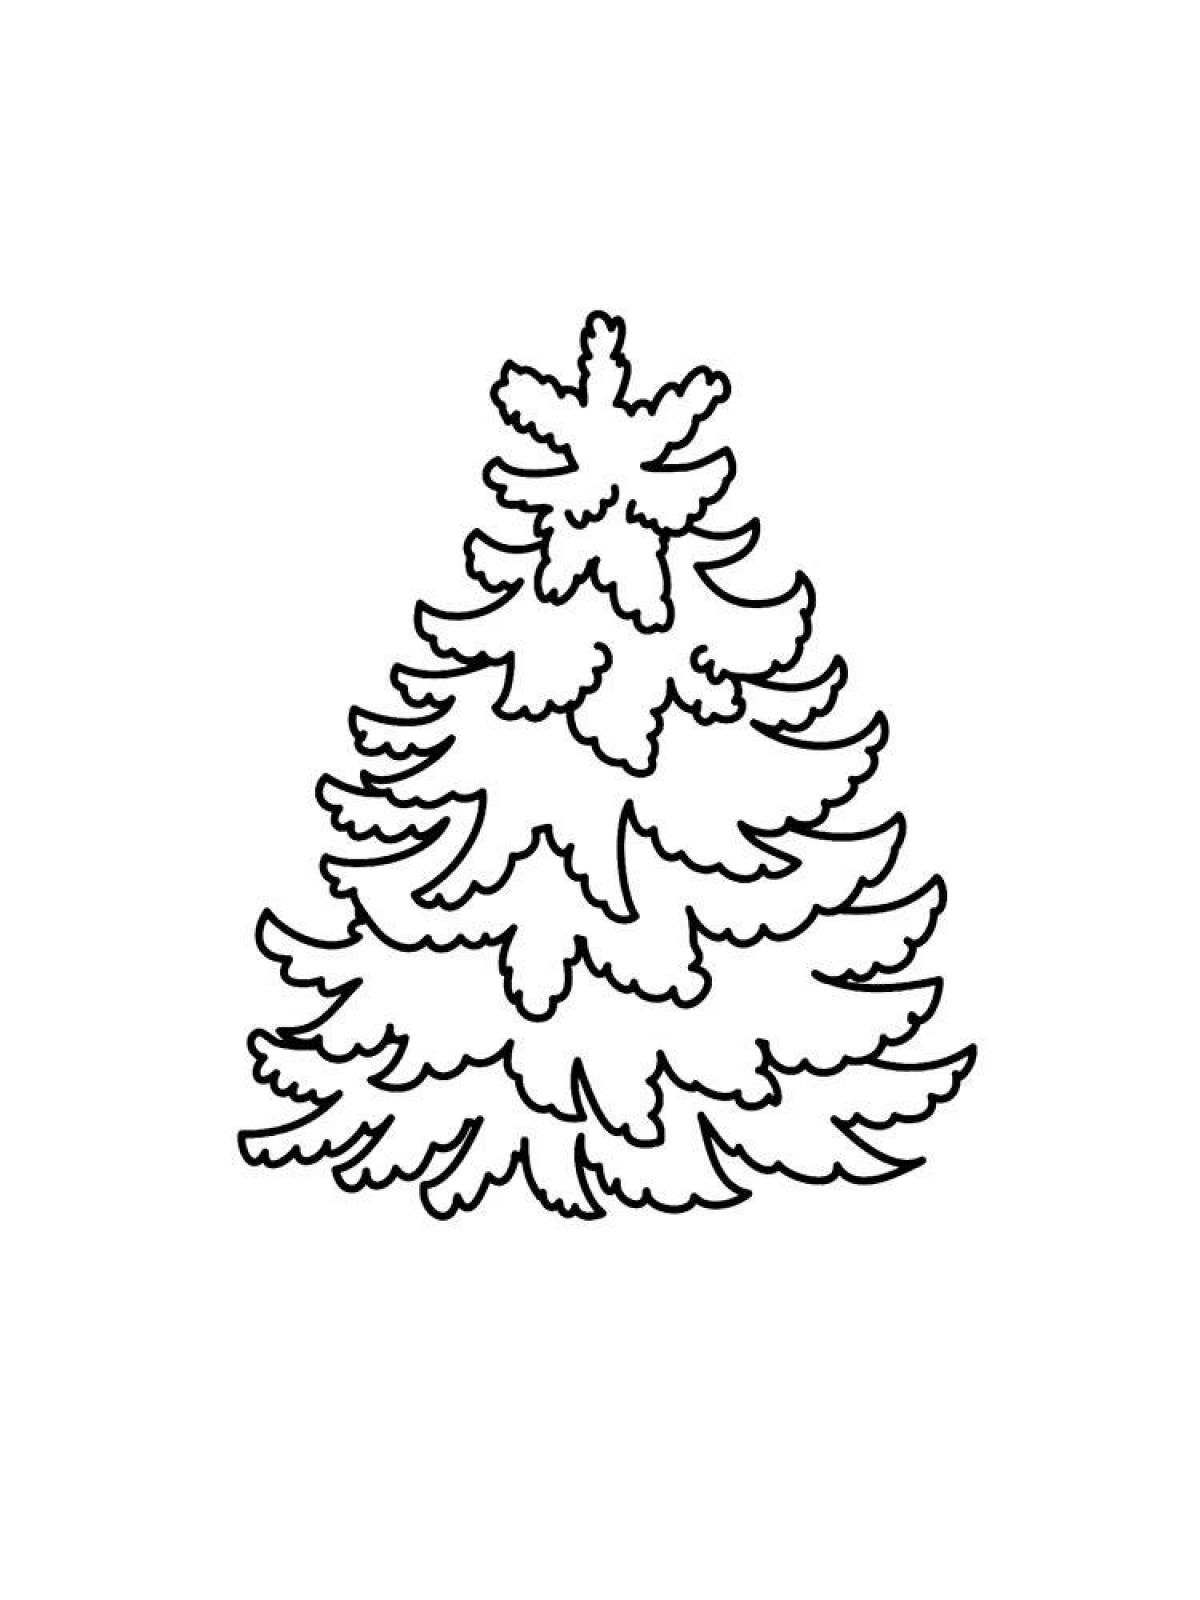 Incredible spruce coloring book